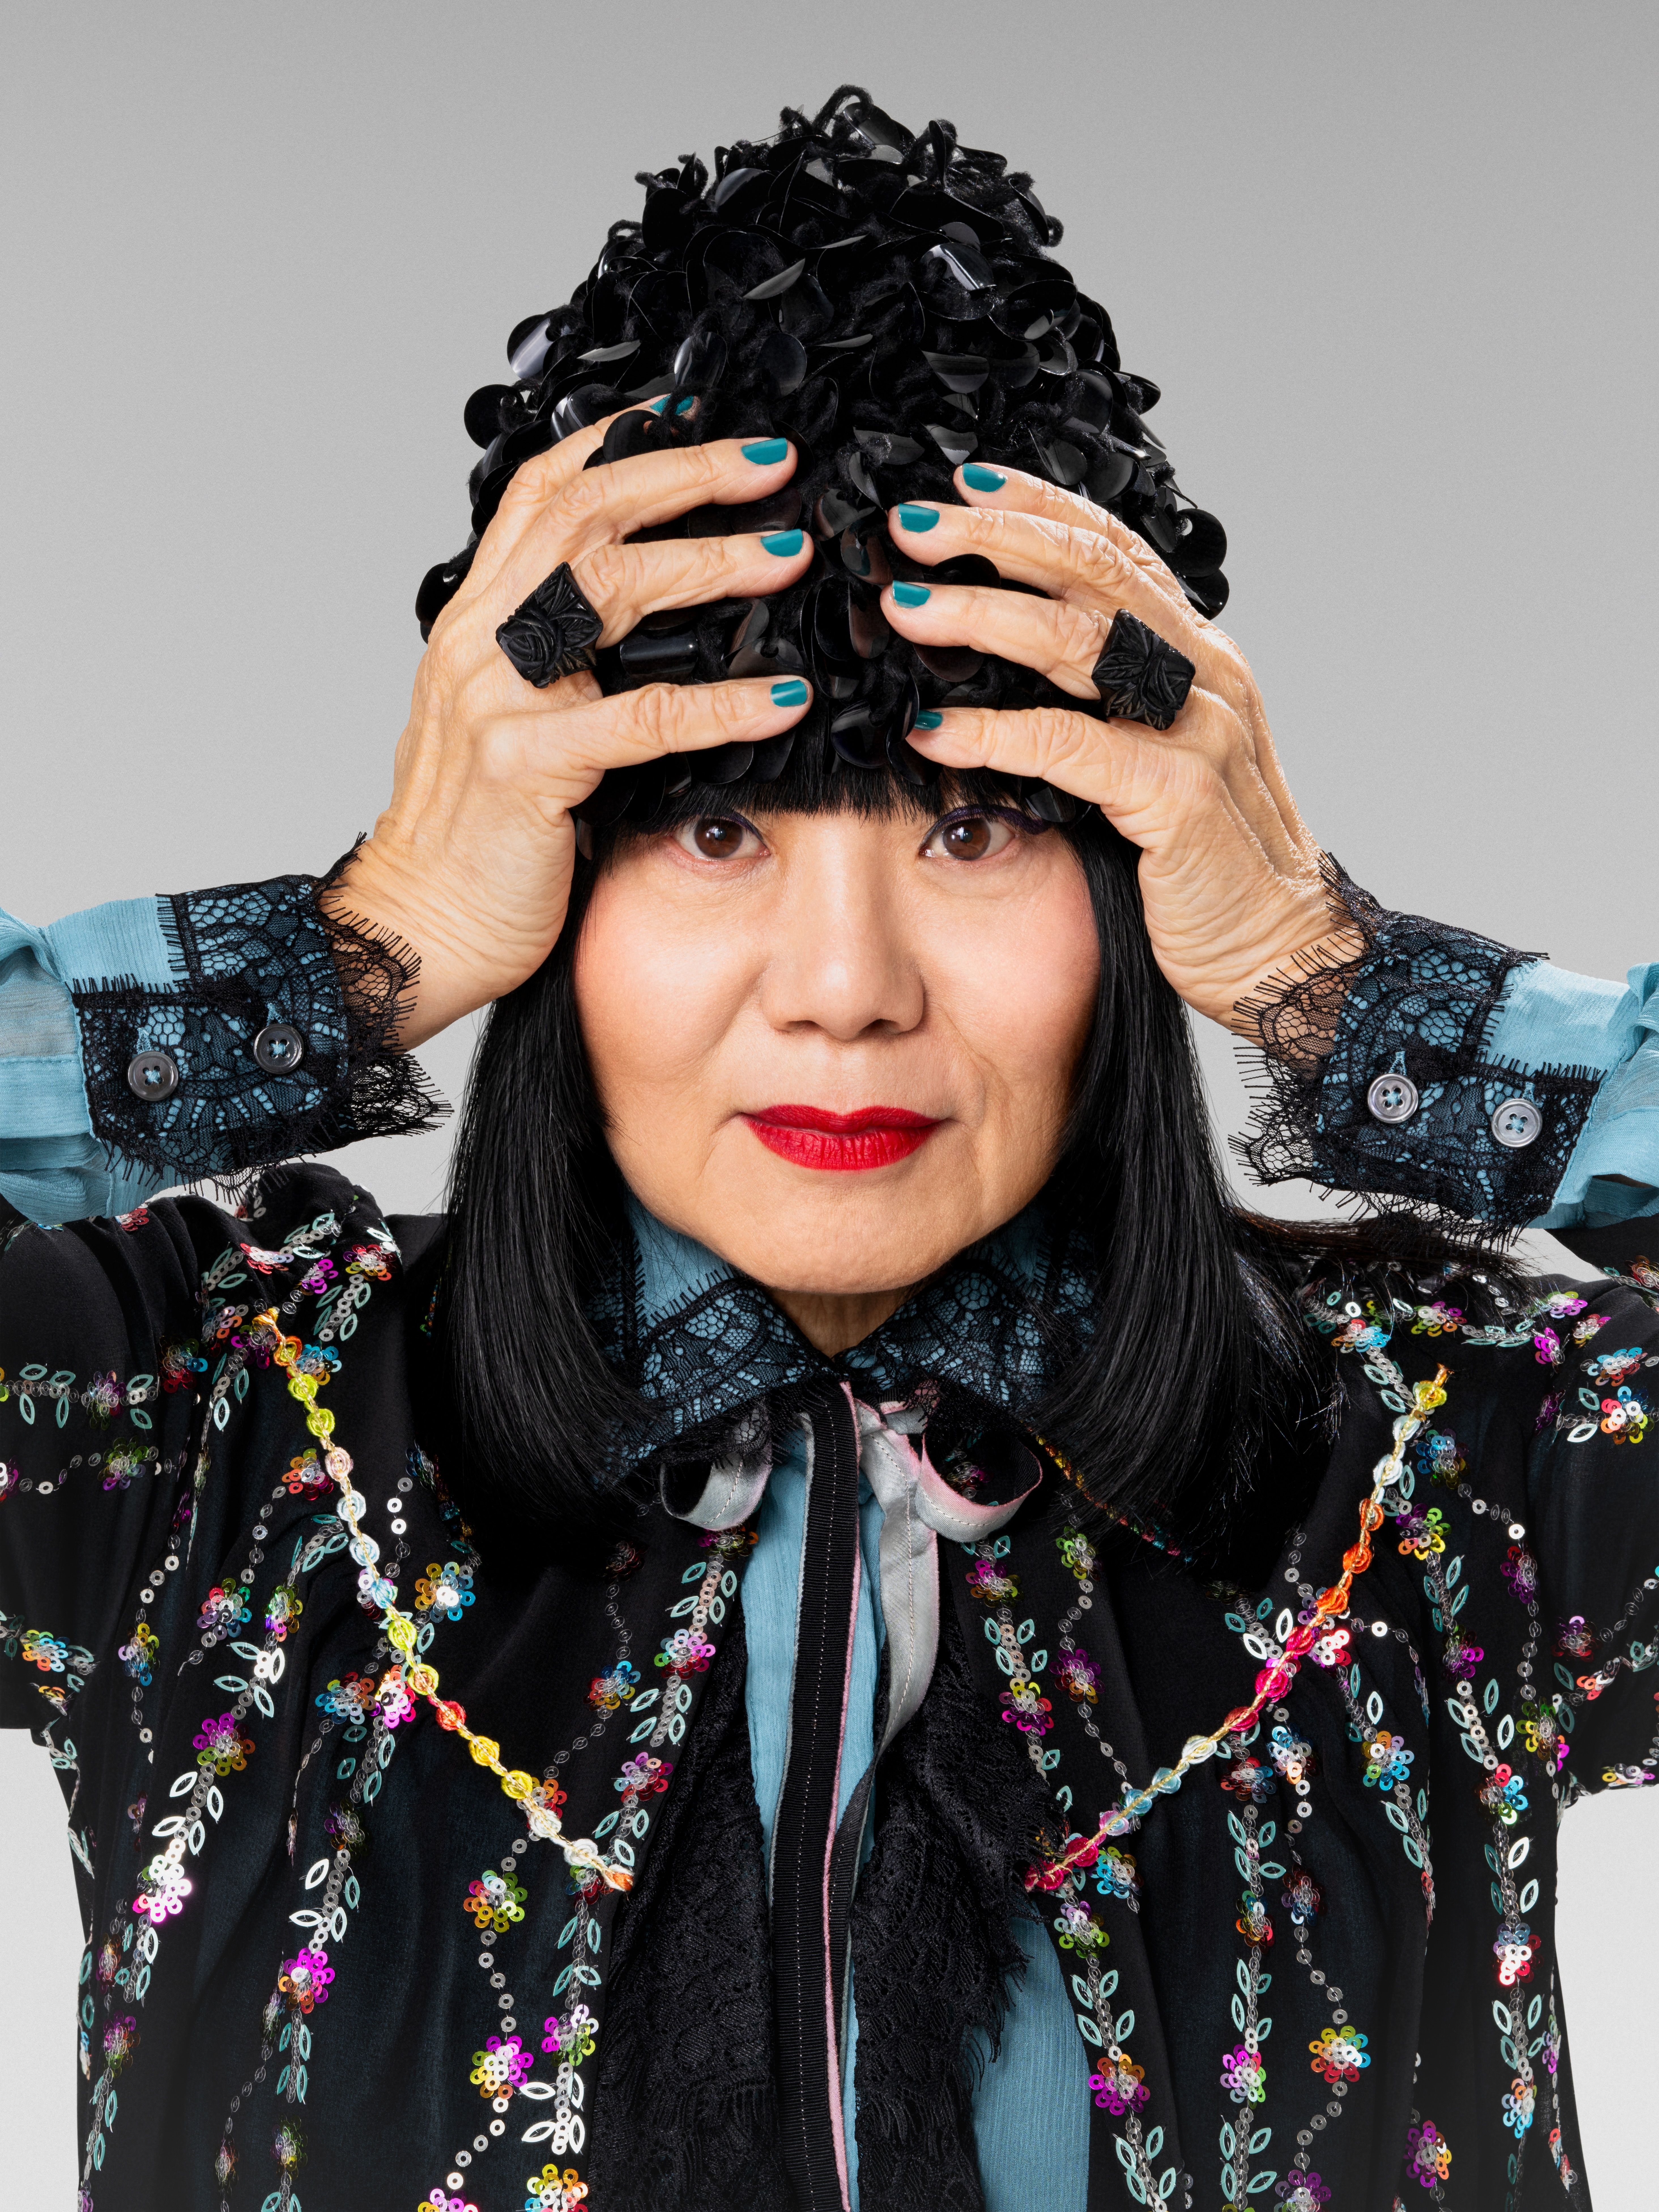 Anna Sui on the Cover of PAPER Magazine - PAPER Magazine